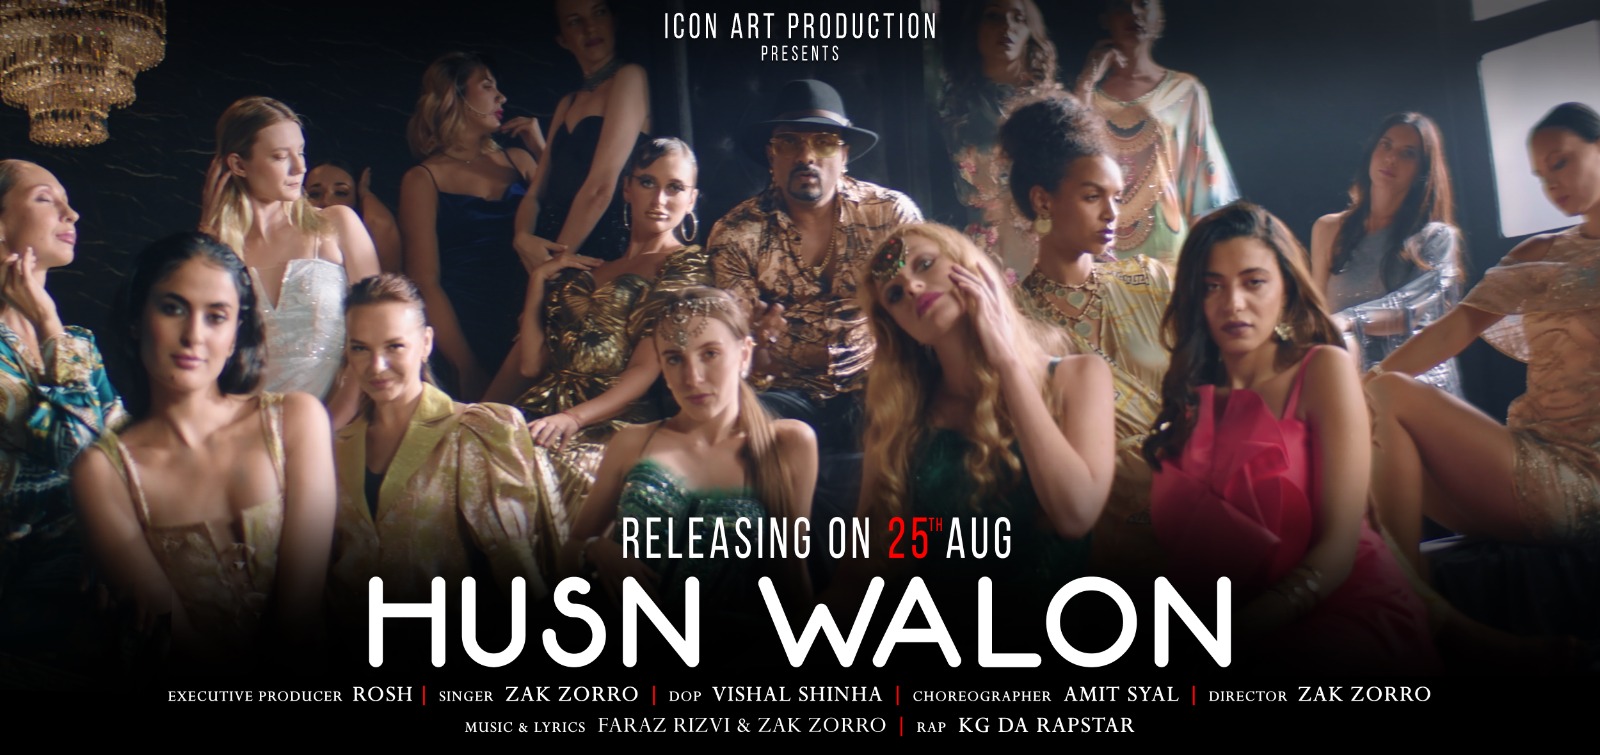 Zak Zorro Teases Audiences with Intriguing "Husn Walon"